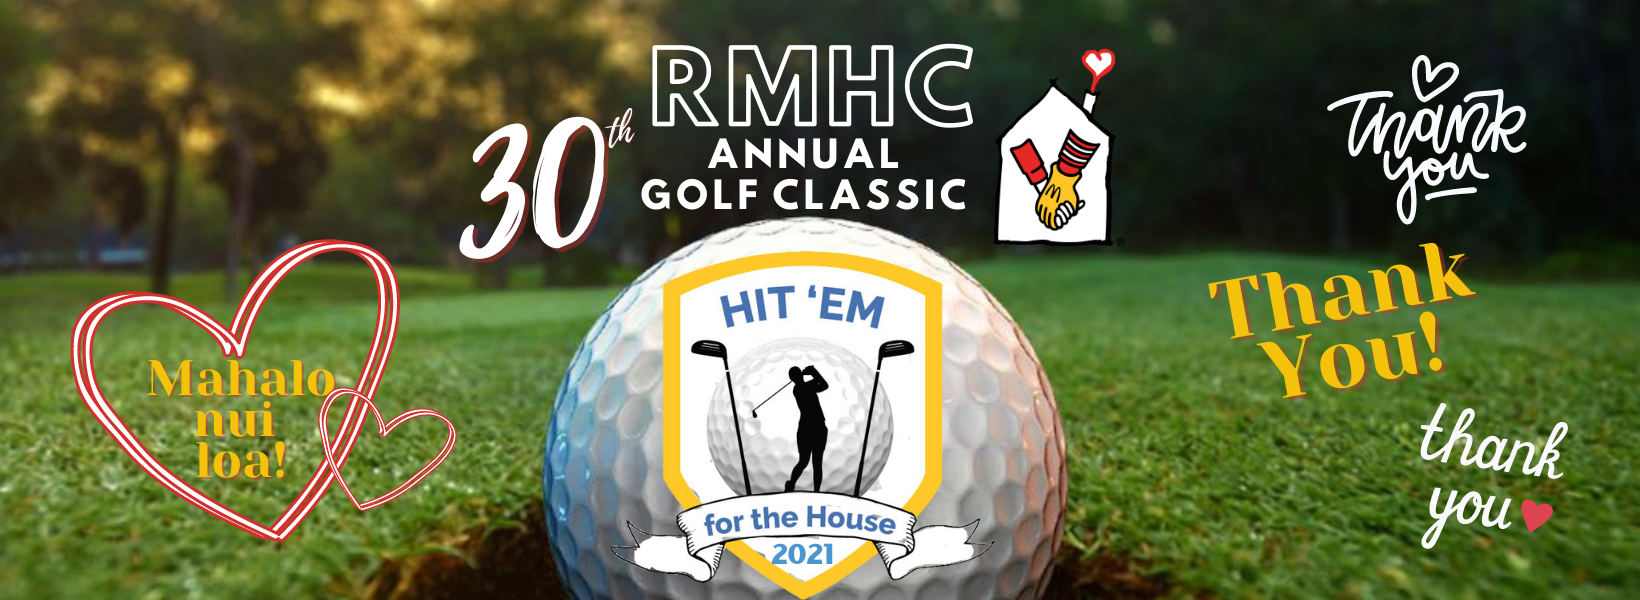 RMHC-Hawaii golf classic open for registration